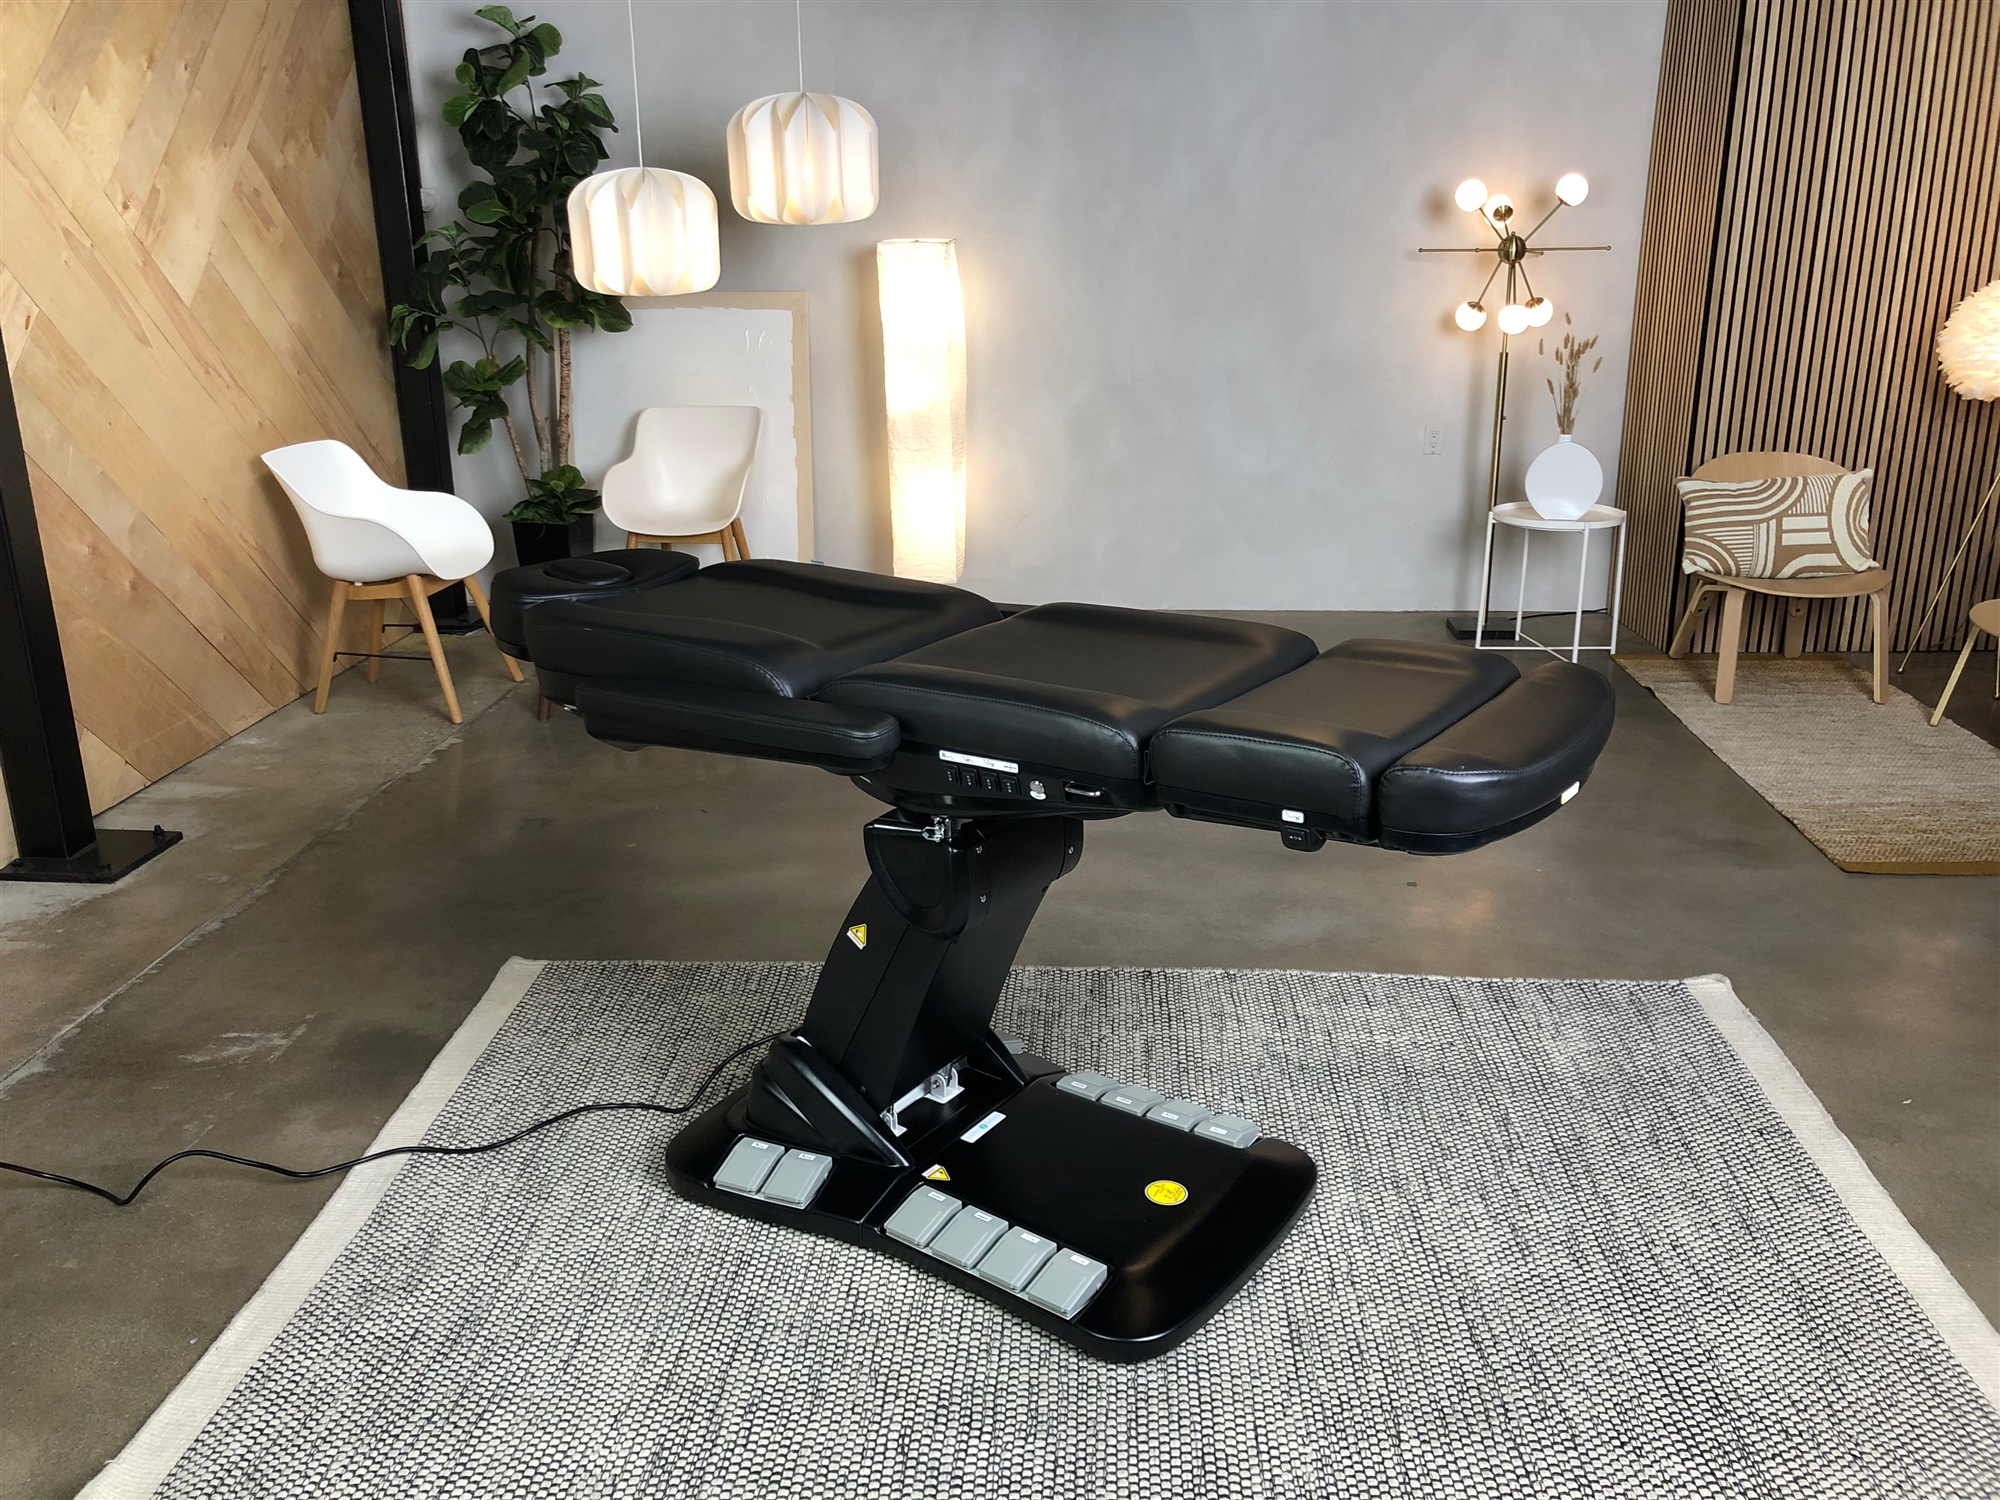 Spa Numa Swivel+ 4 Motor Electric Treatment Chair Bed with built-in foot  pedals - 2246EB